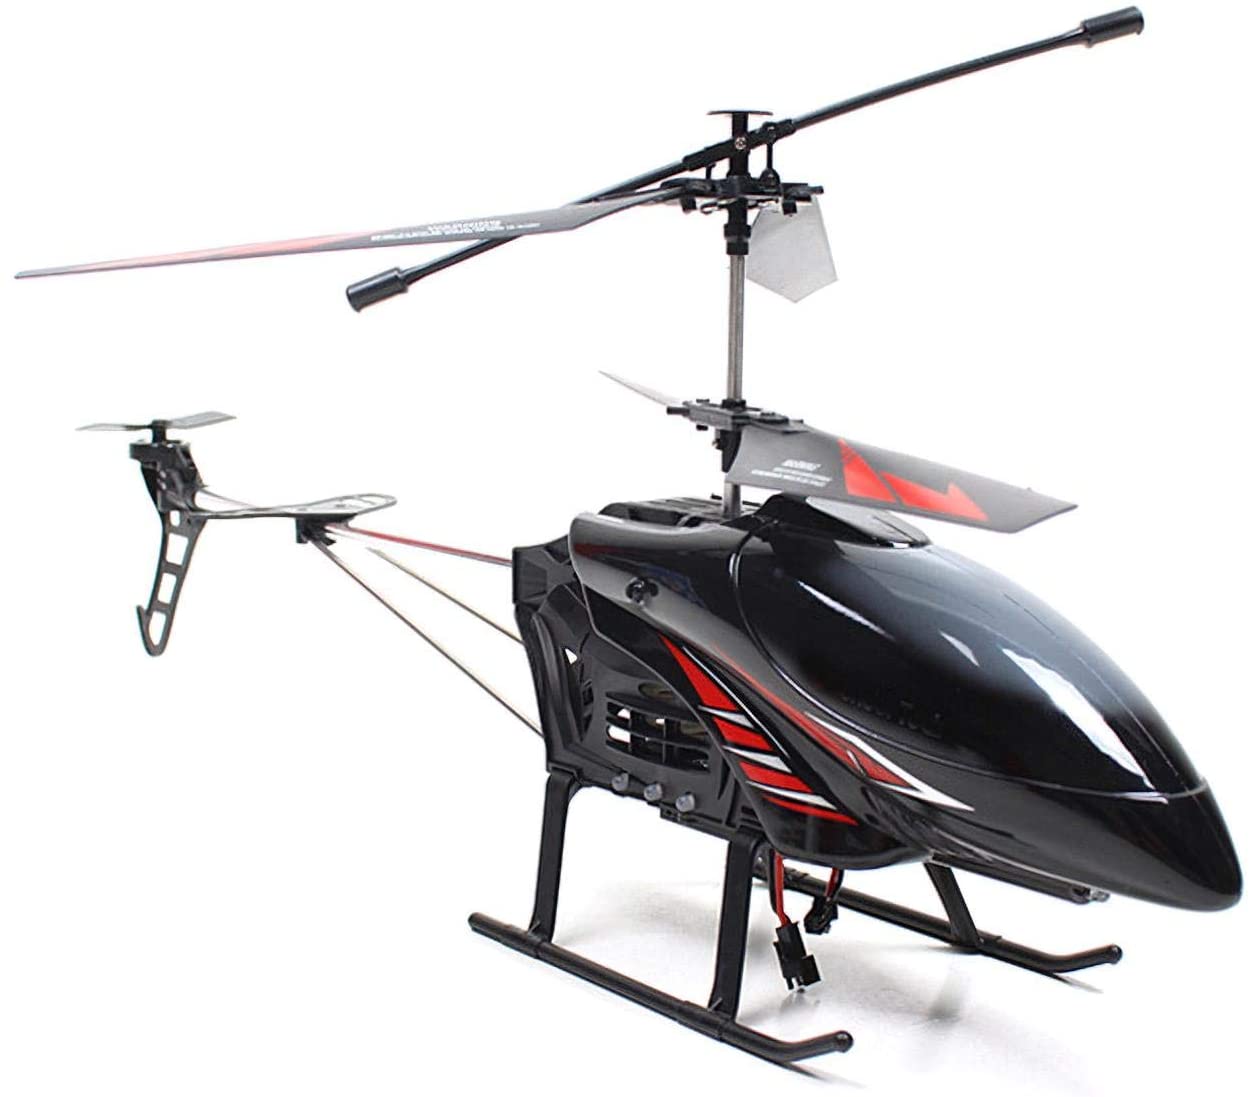 Jumbo Night Hawk 3.5 Channel 2.4G Big Size Remote Control RC Metal Alloy Helicopter W/HD Camera Gyro 6 Axis for Outdoor Flying Huge